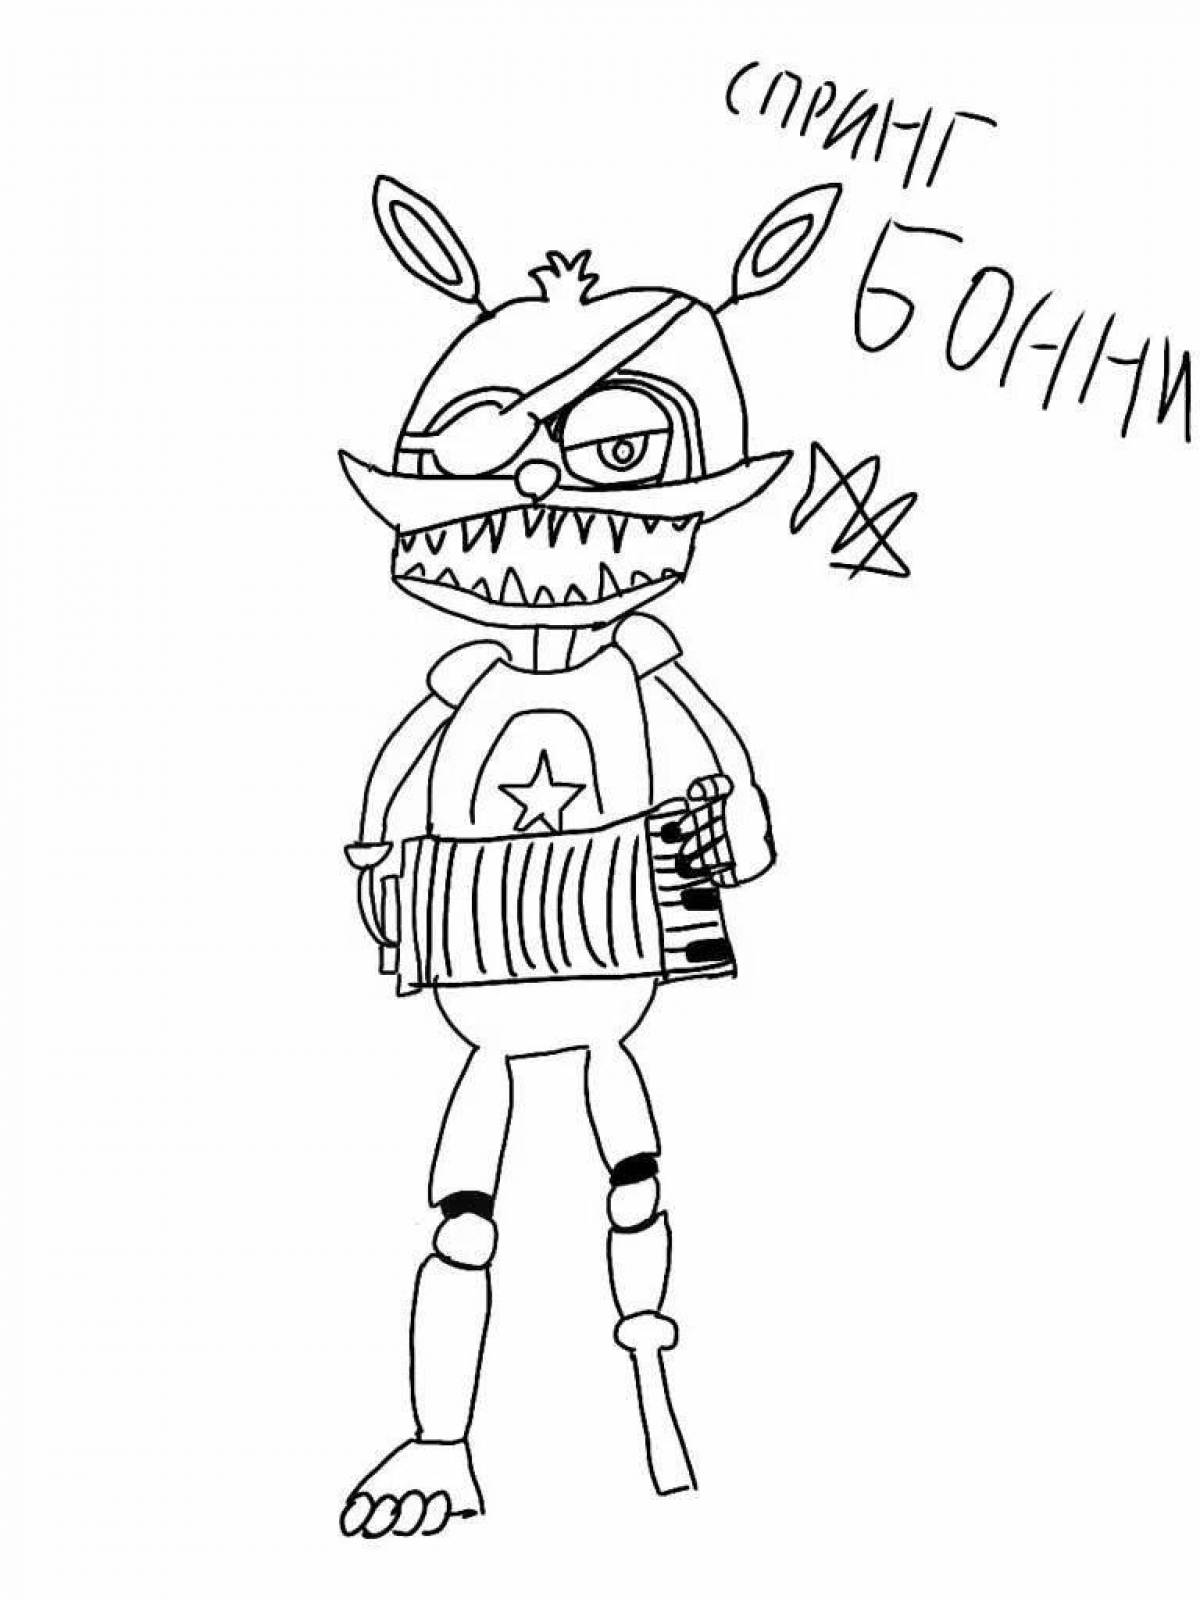 Coloring book shimmery glam rock bonnie